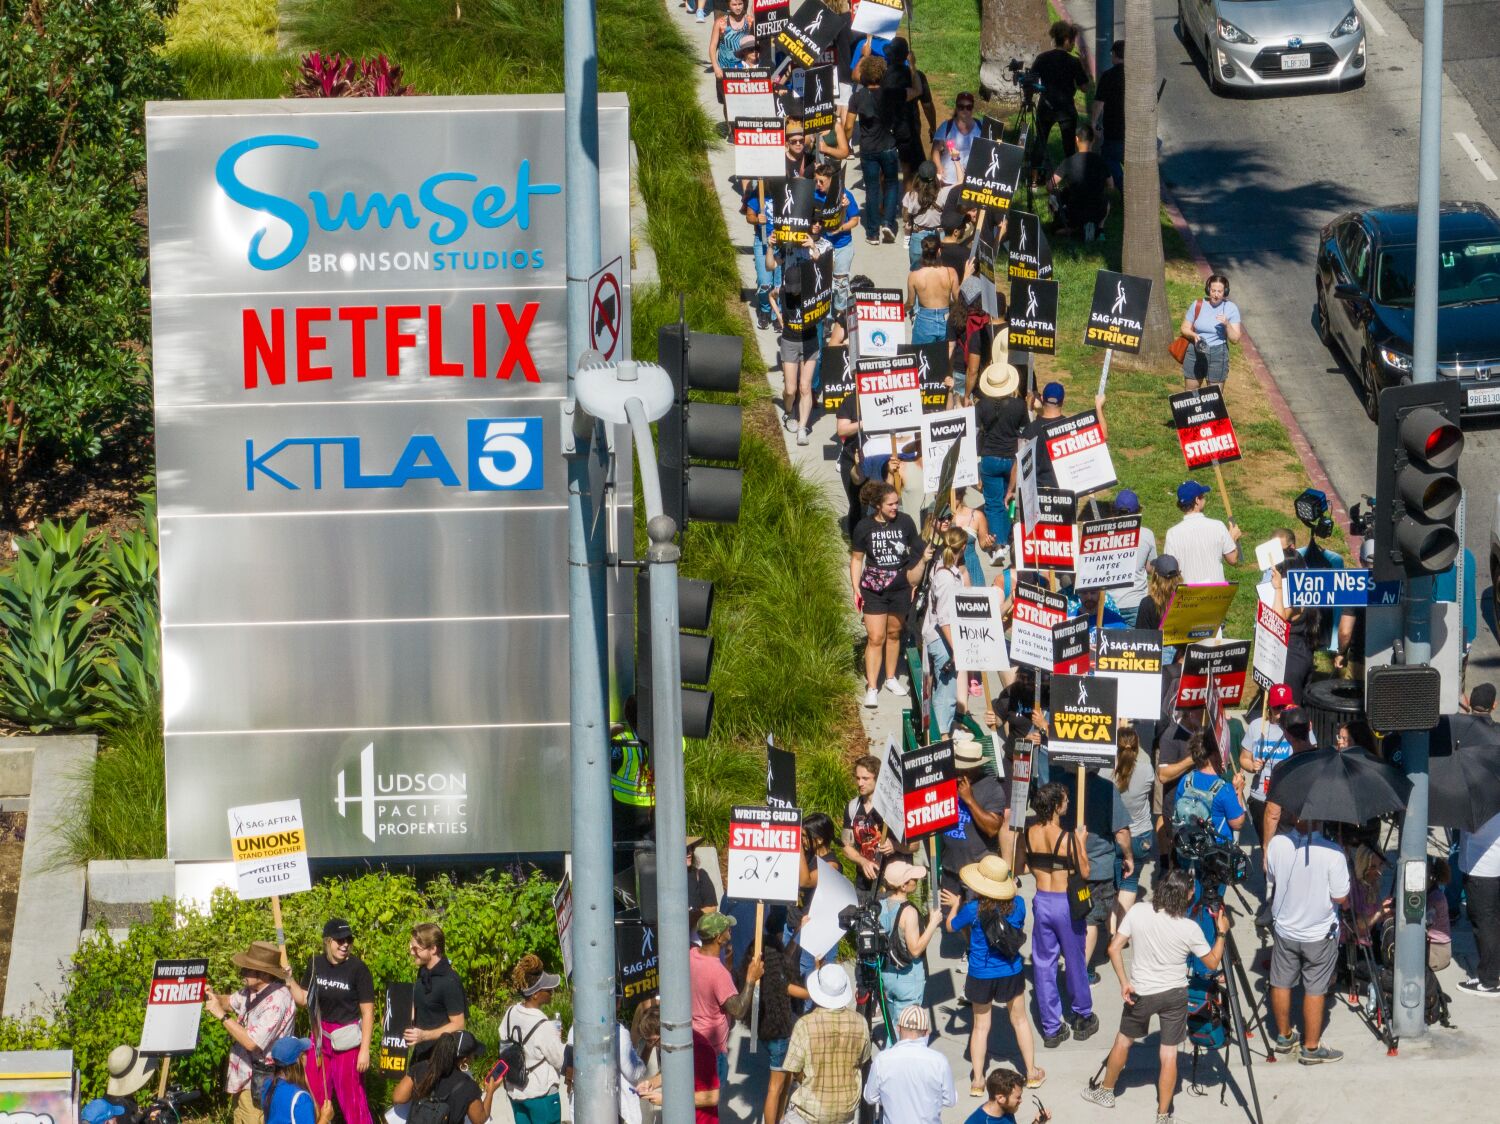 Can actors go to movie premieres and film festivals? Here's what's allowed during a strike